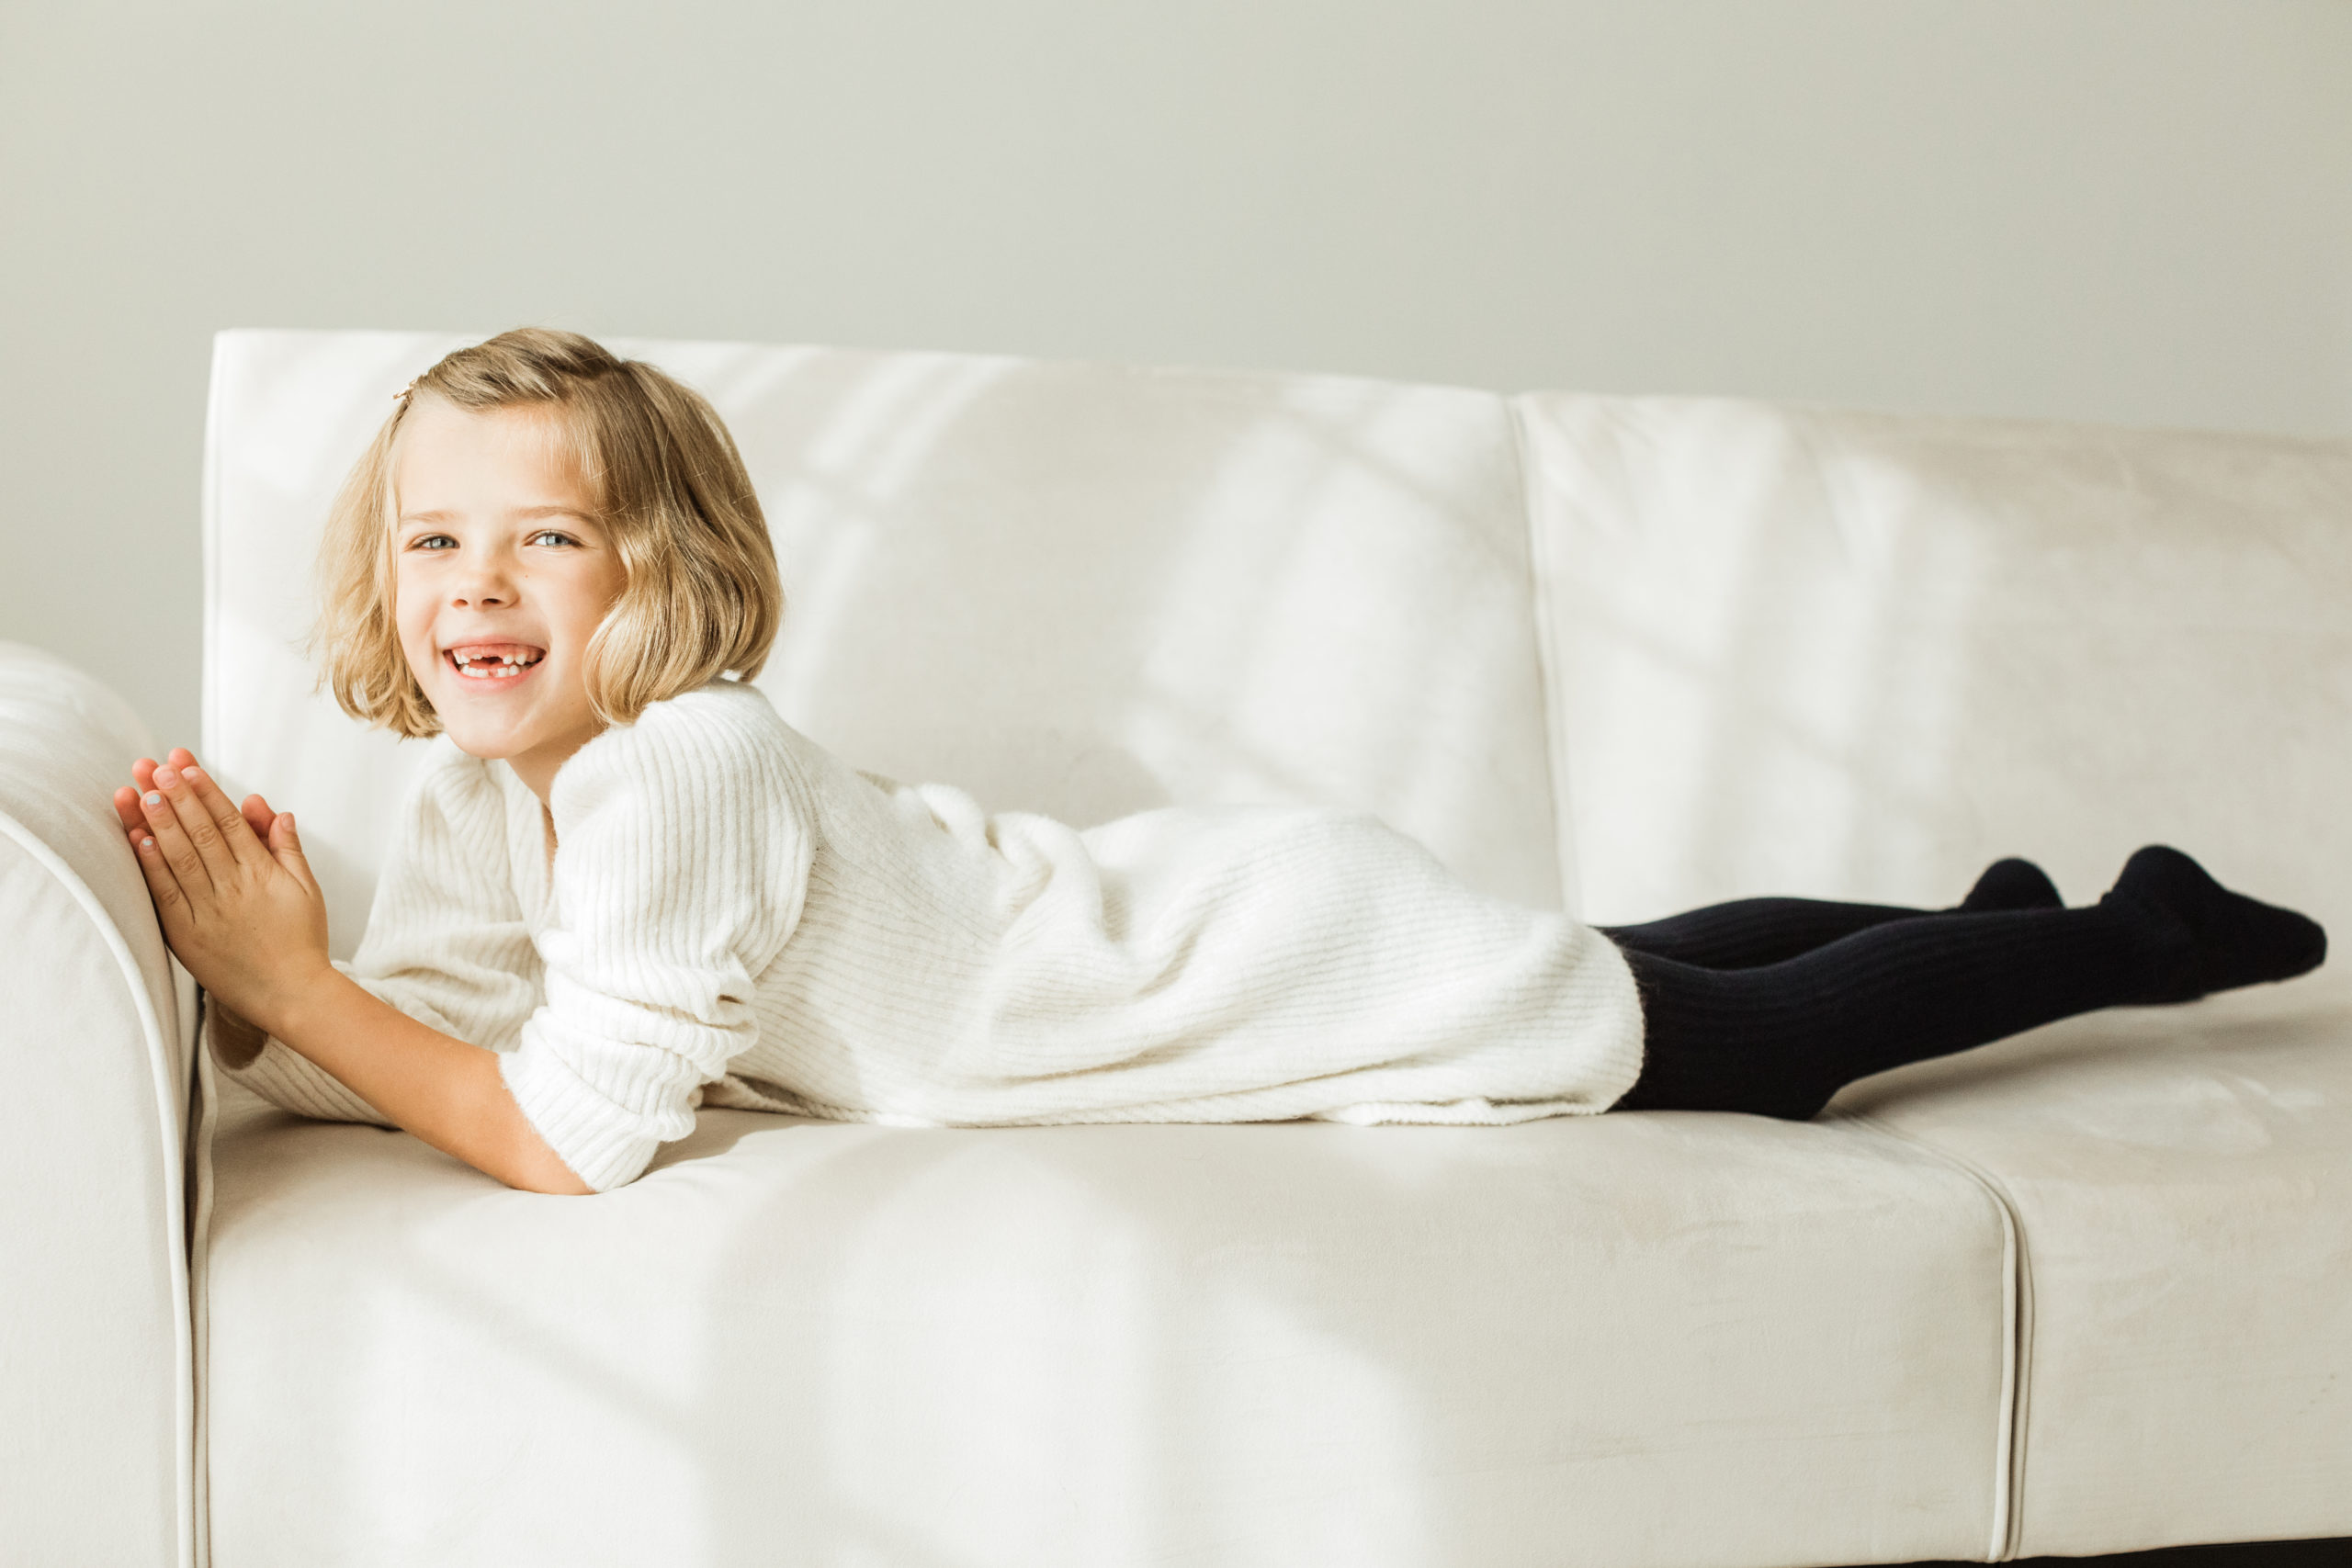 Young girl in white sweater dress and black tights smiling and laying on her belly on white couch.